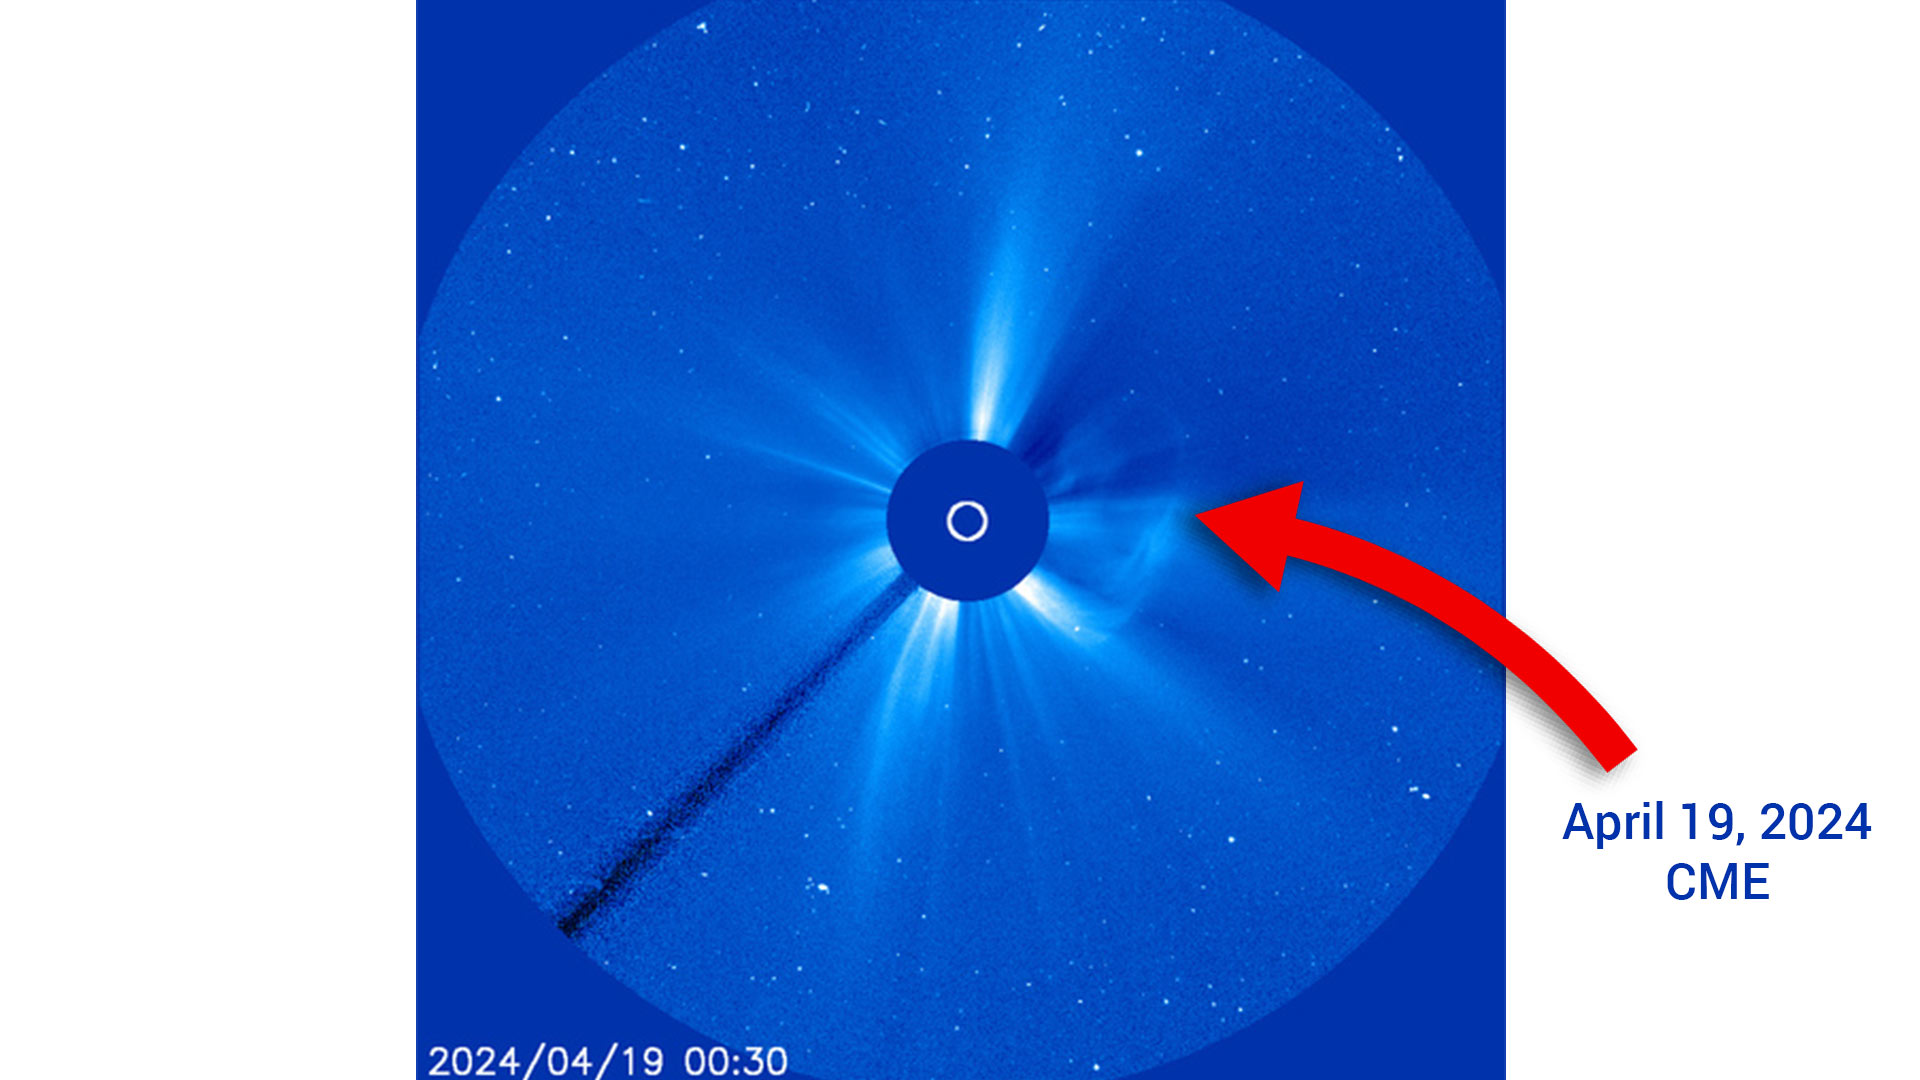 CME spotted by the NWS Space Weather Prediction Center